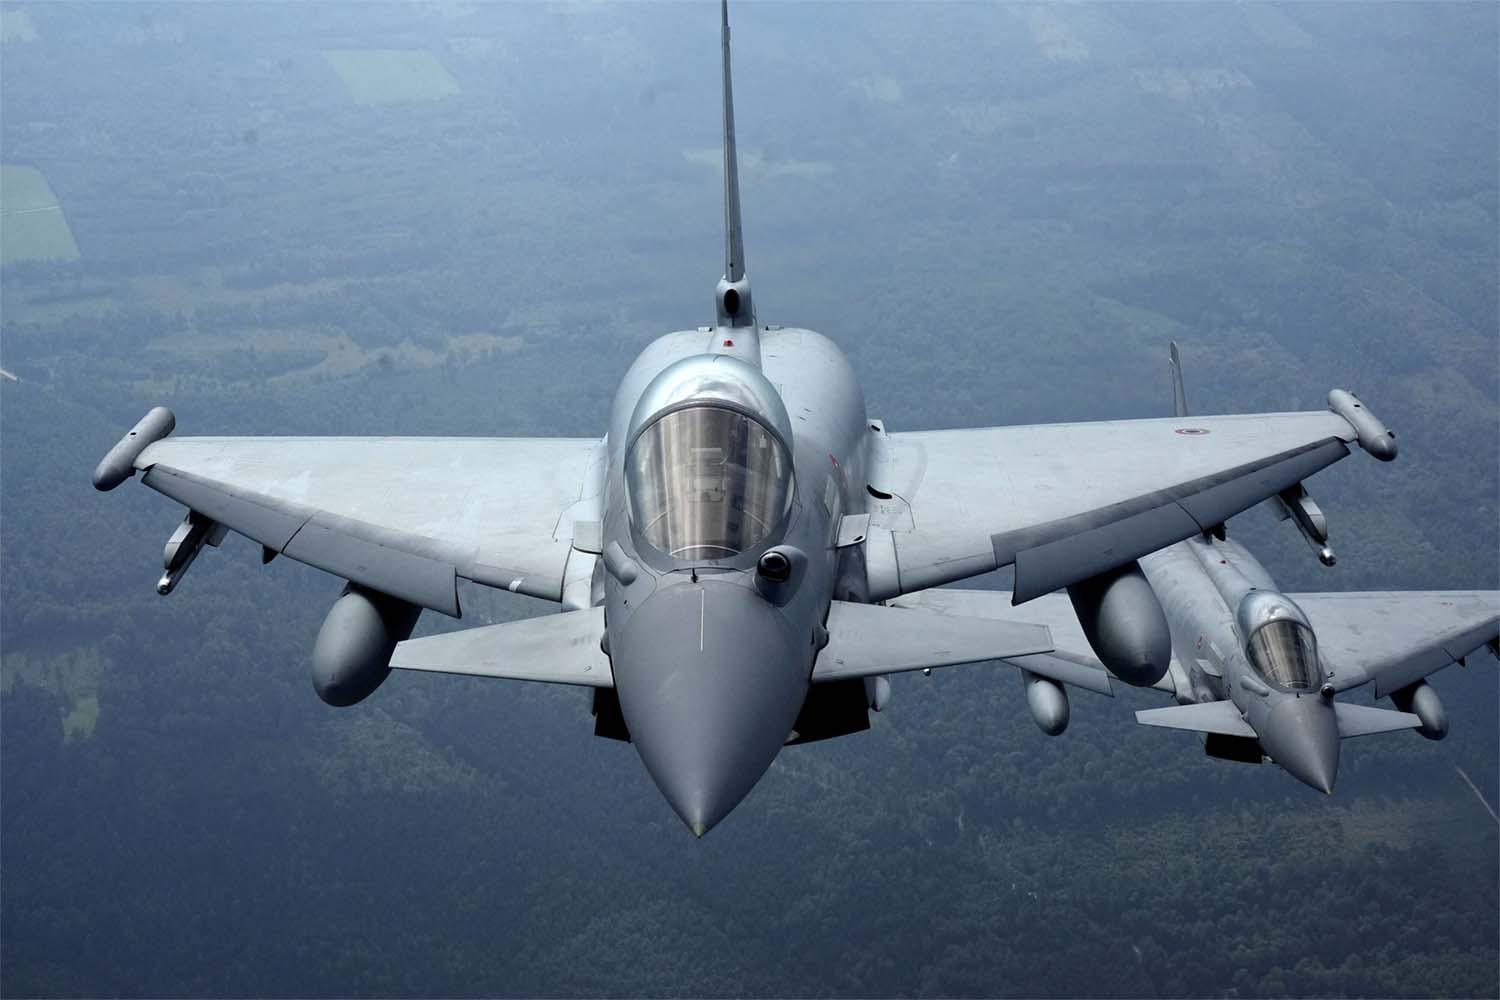 The Eurofighter Typhoon jets are built by a consortium of Germany, Britain, Italy and Spain